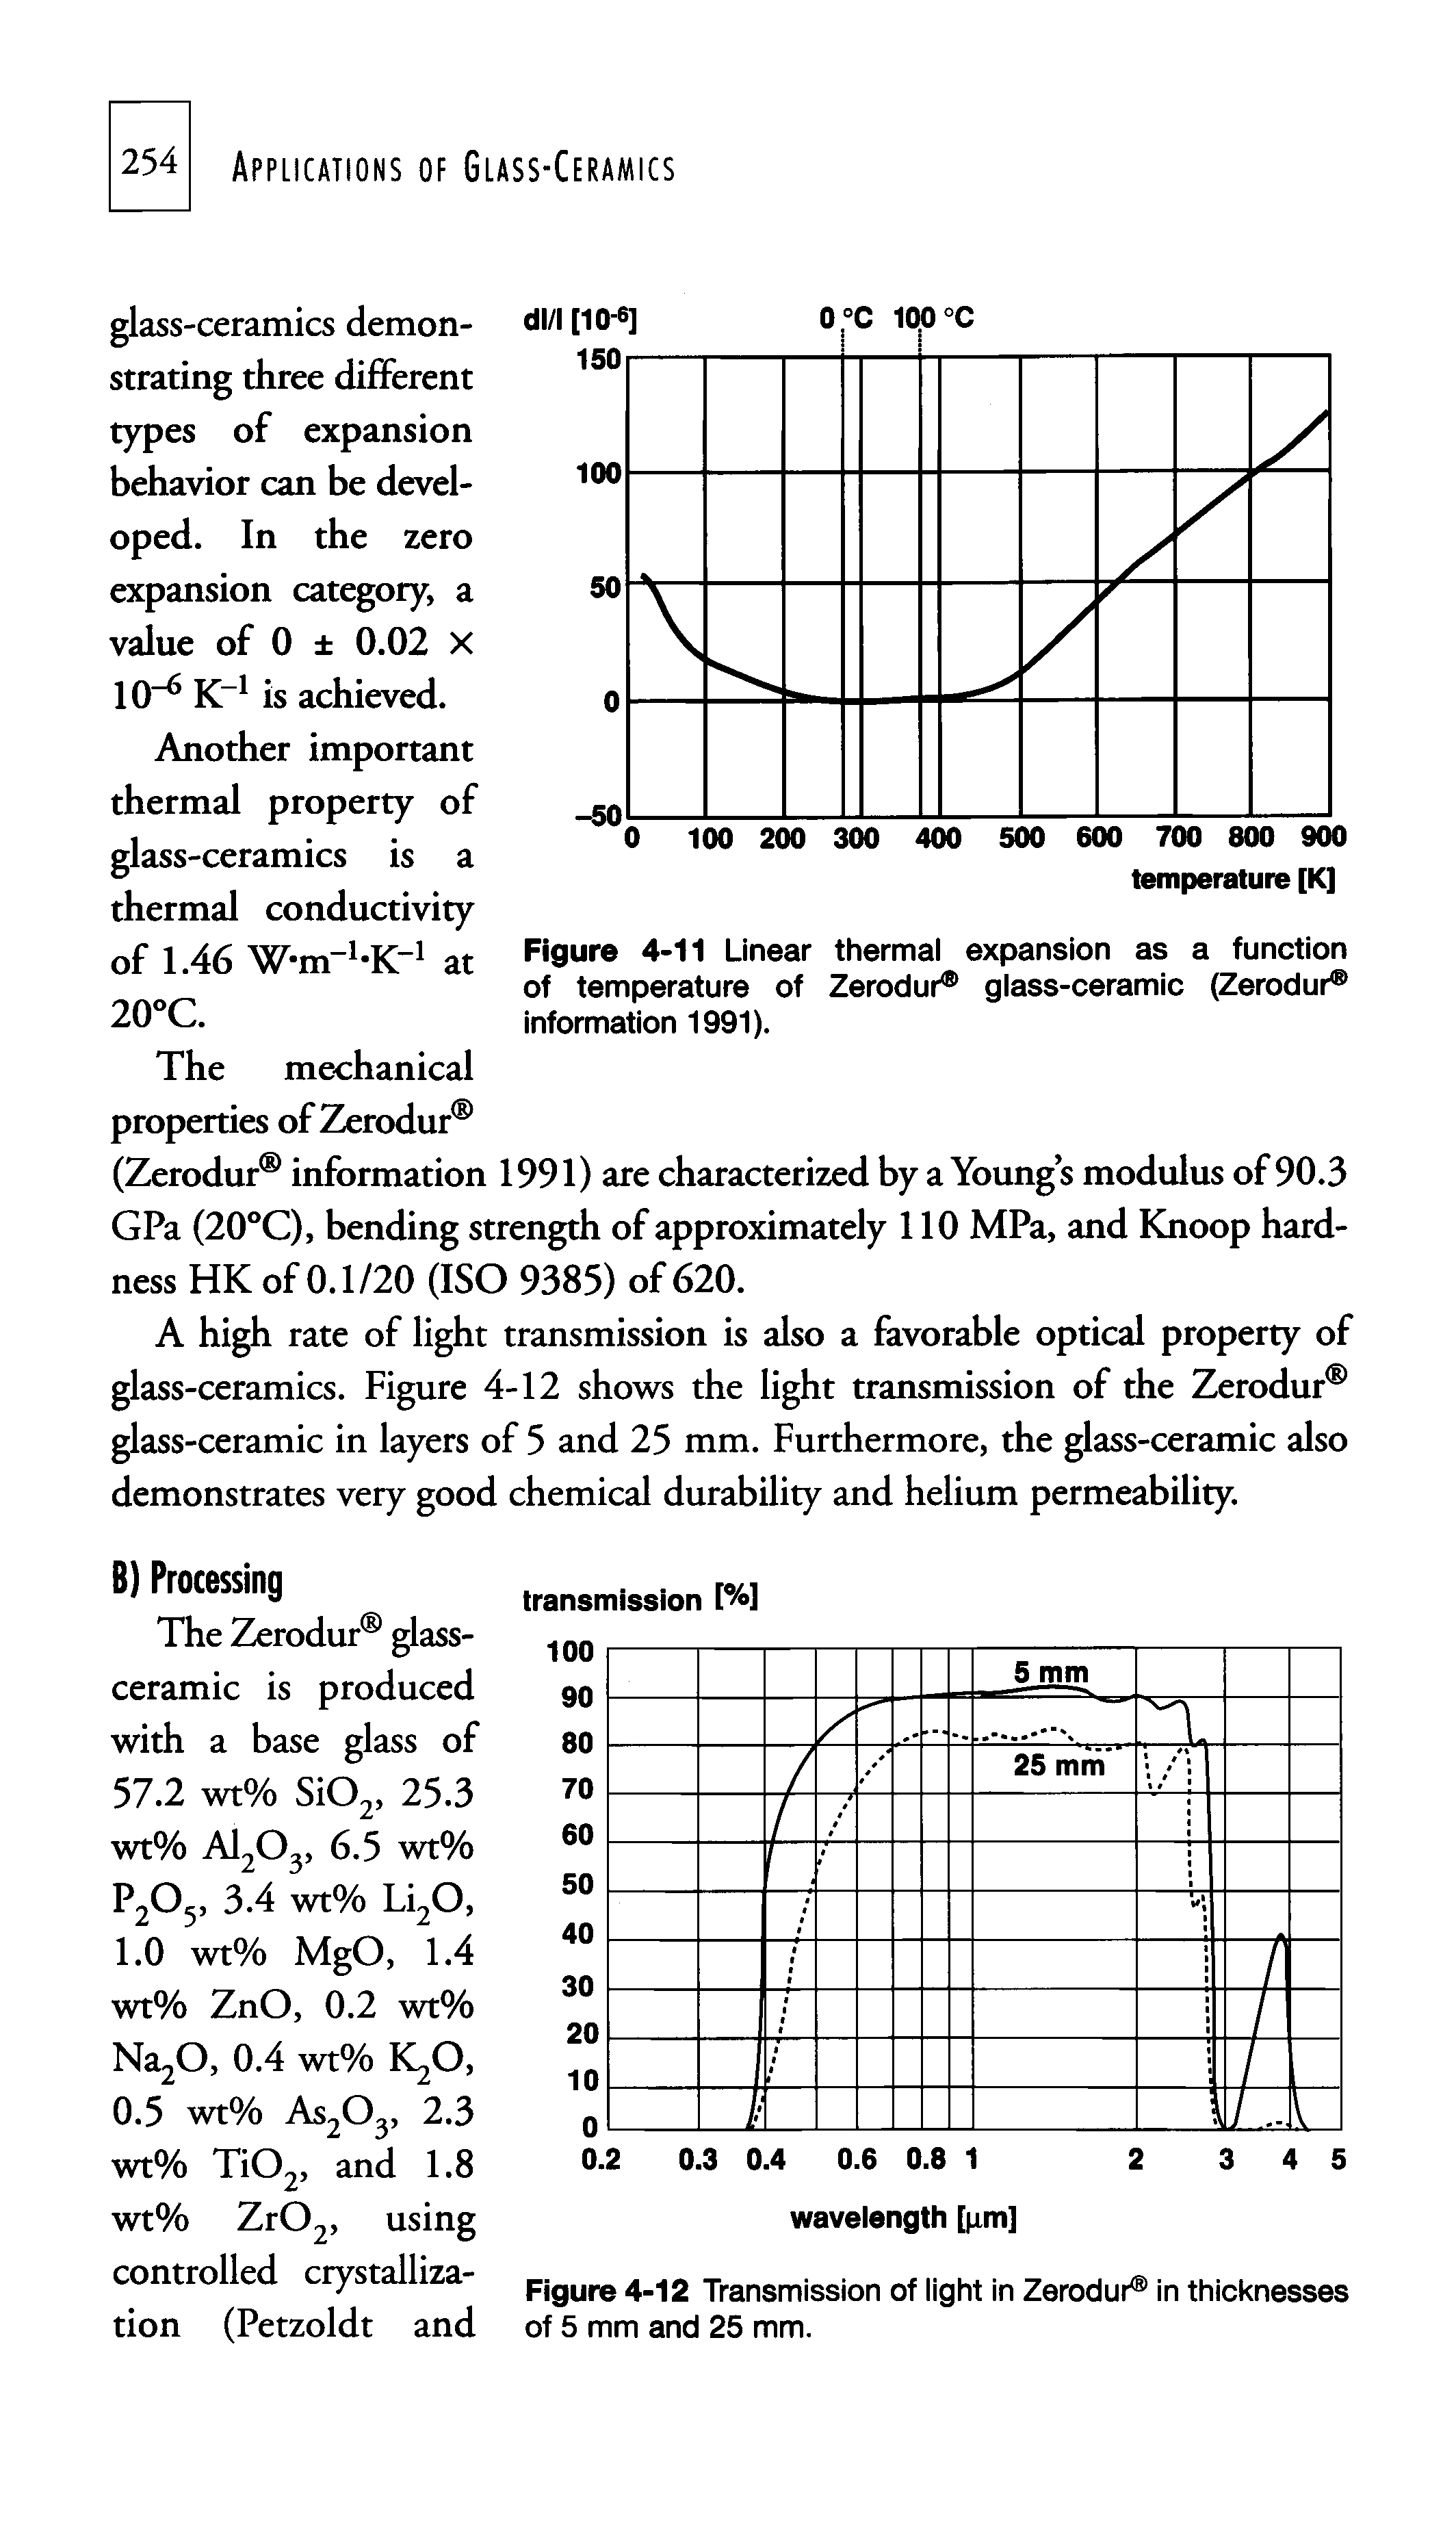 Figure 4-11 Linear thermal expansion as a function of temperature of Zerodur glass-ceramic (Zerodur information 1991).